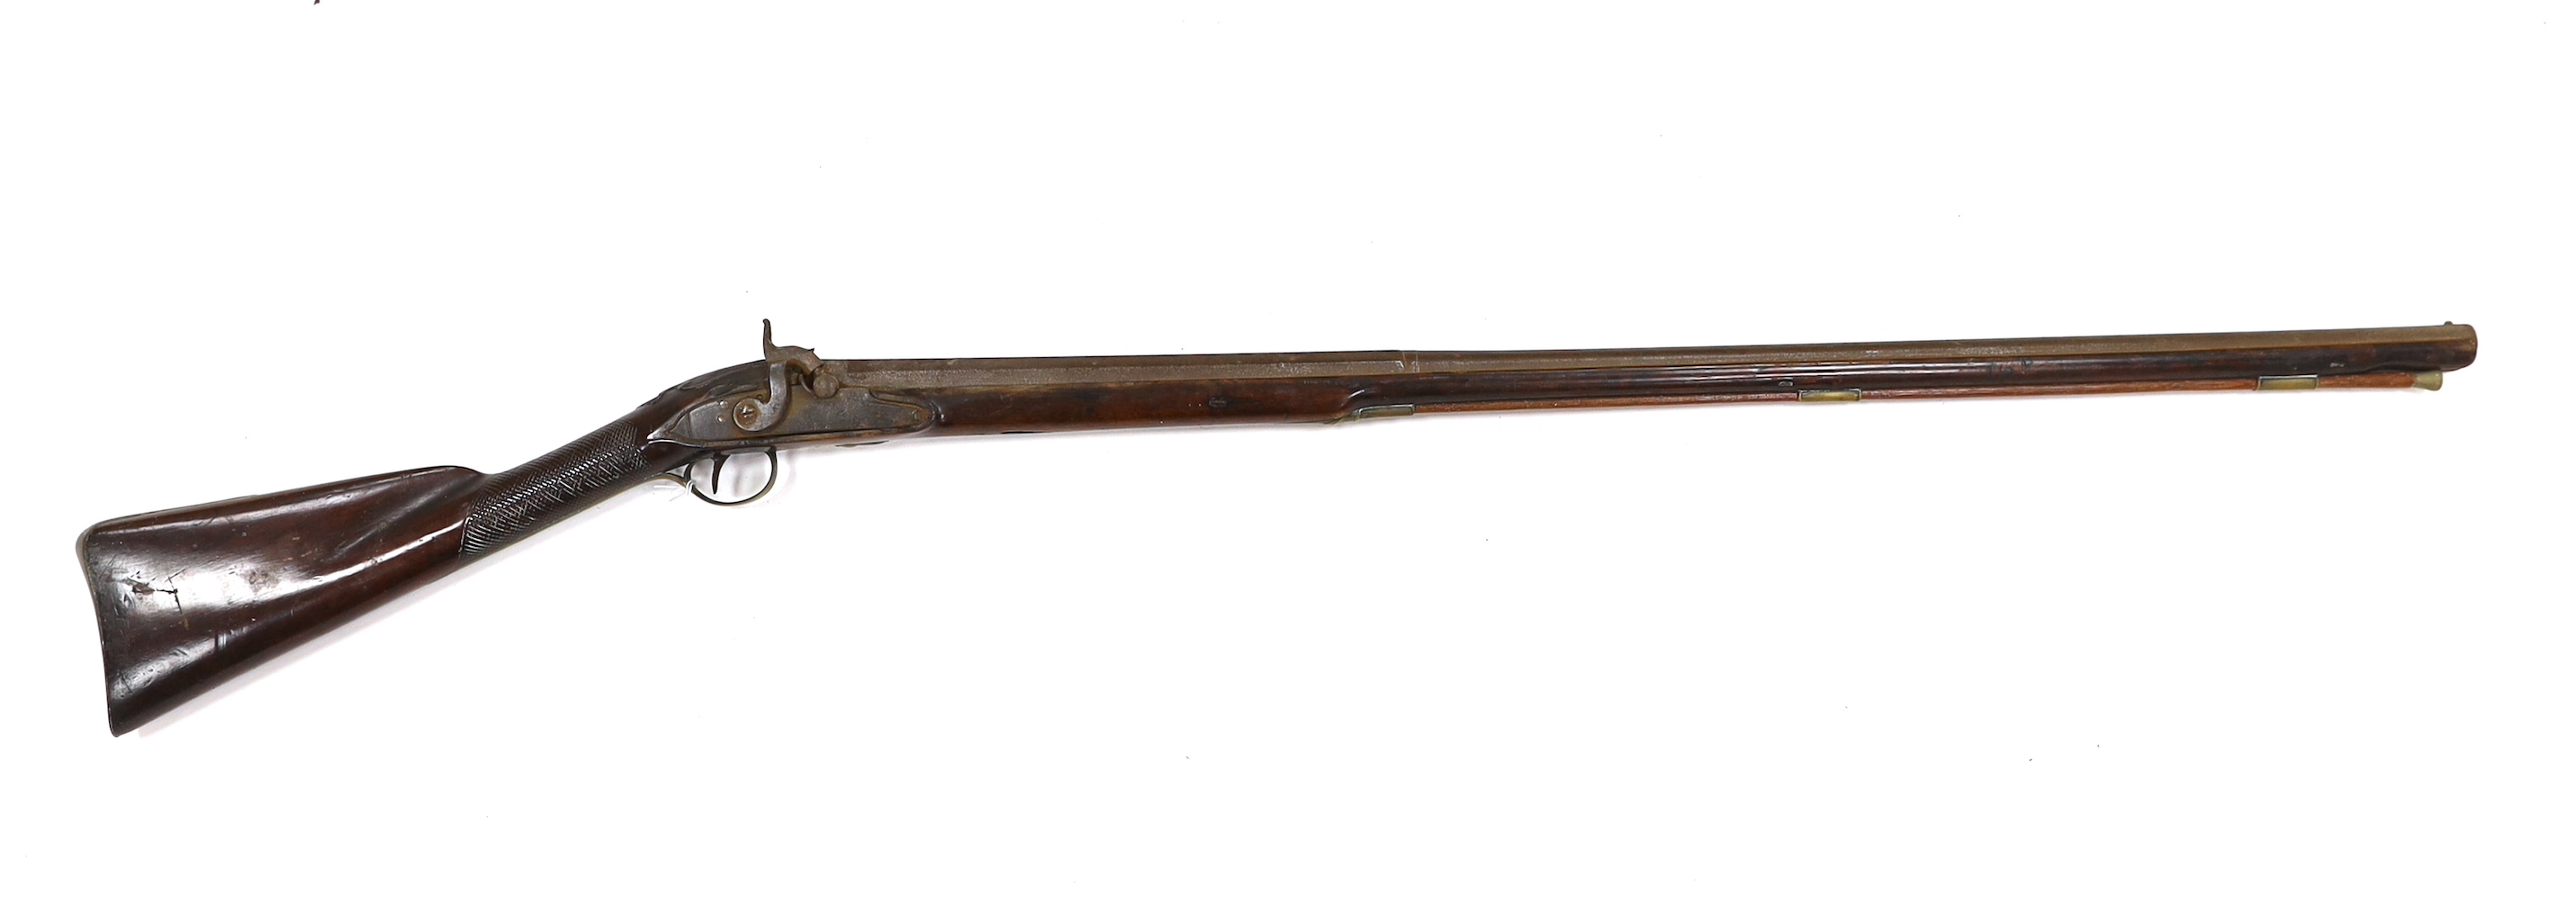 A 1786 percussion 12 bore fowling piece, converted from flintlock, with a fully stocked half octagonal barrel, London proofs, brass furniture and sideplate engraved IR 1786, chequered grip and wooden ramrod, barrel 96cm